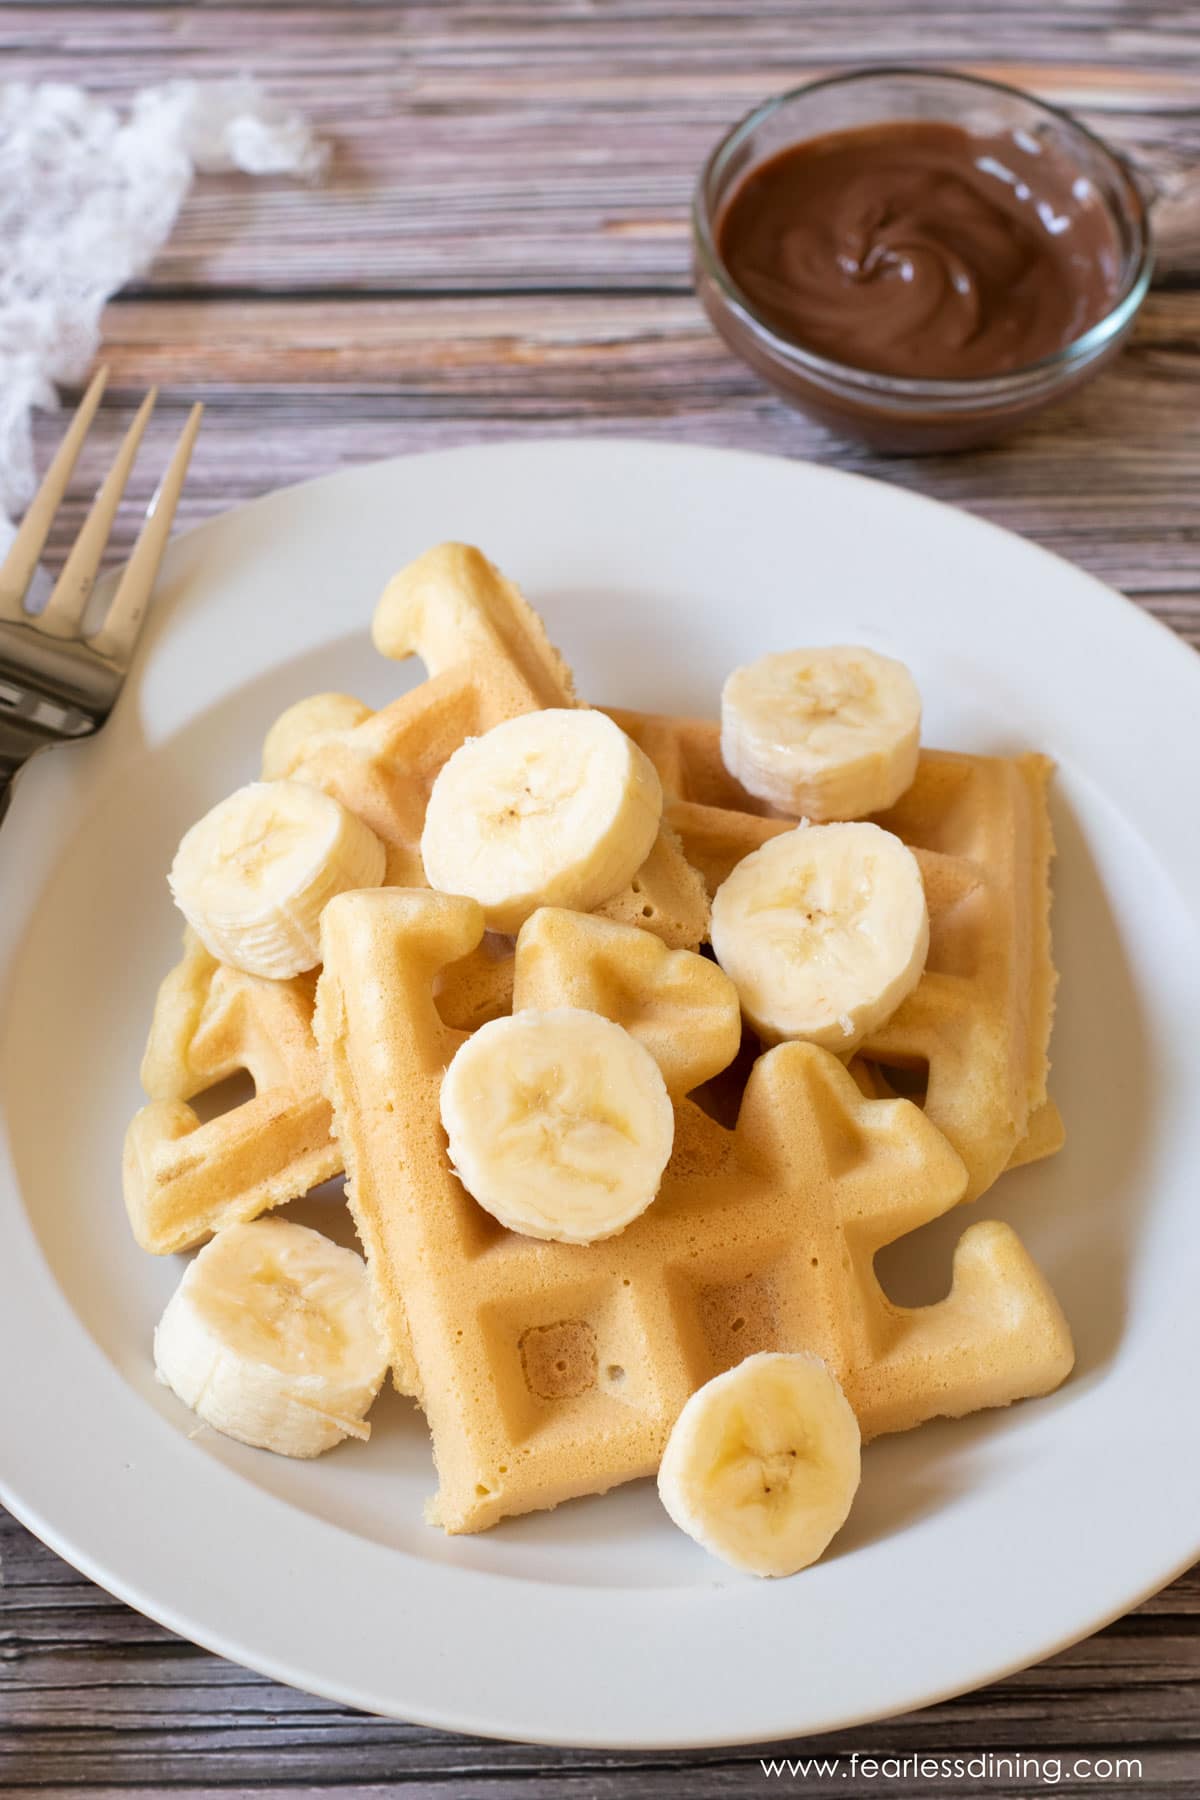 Mochi waffles topped with sliced bananas.